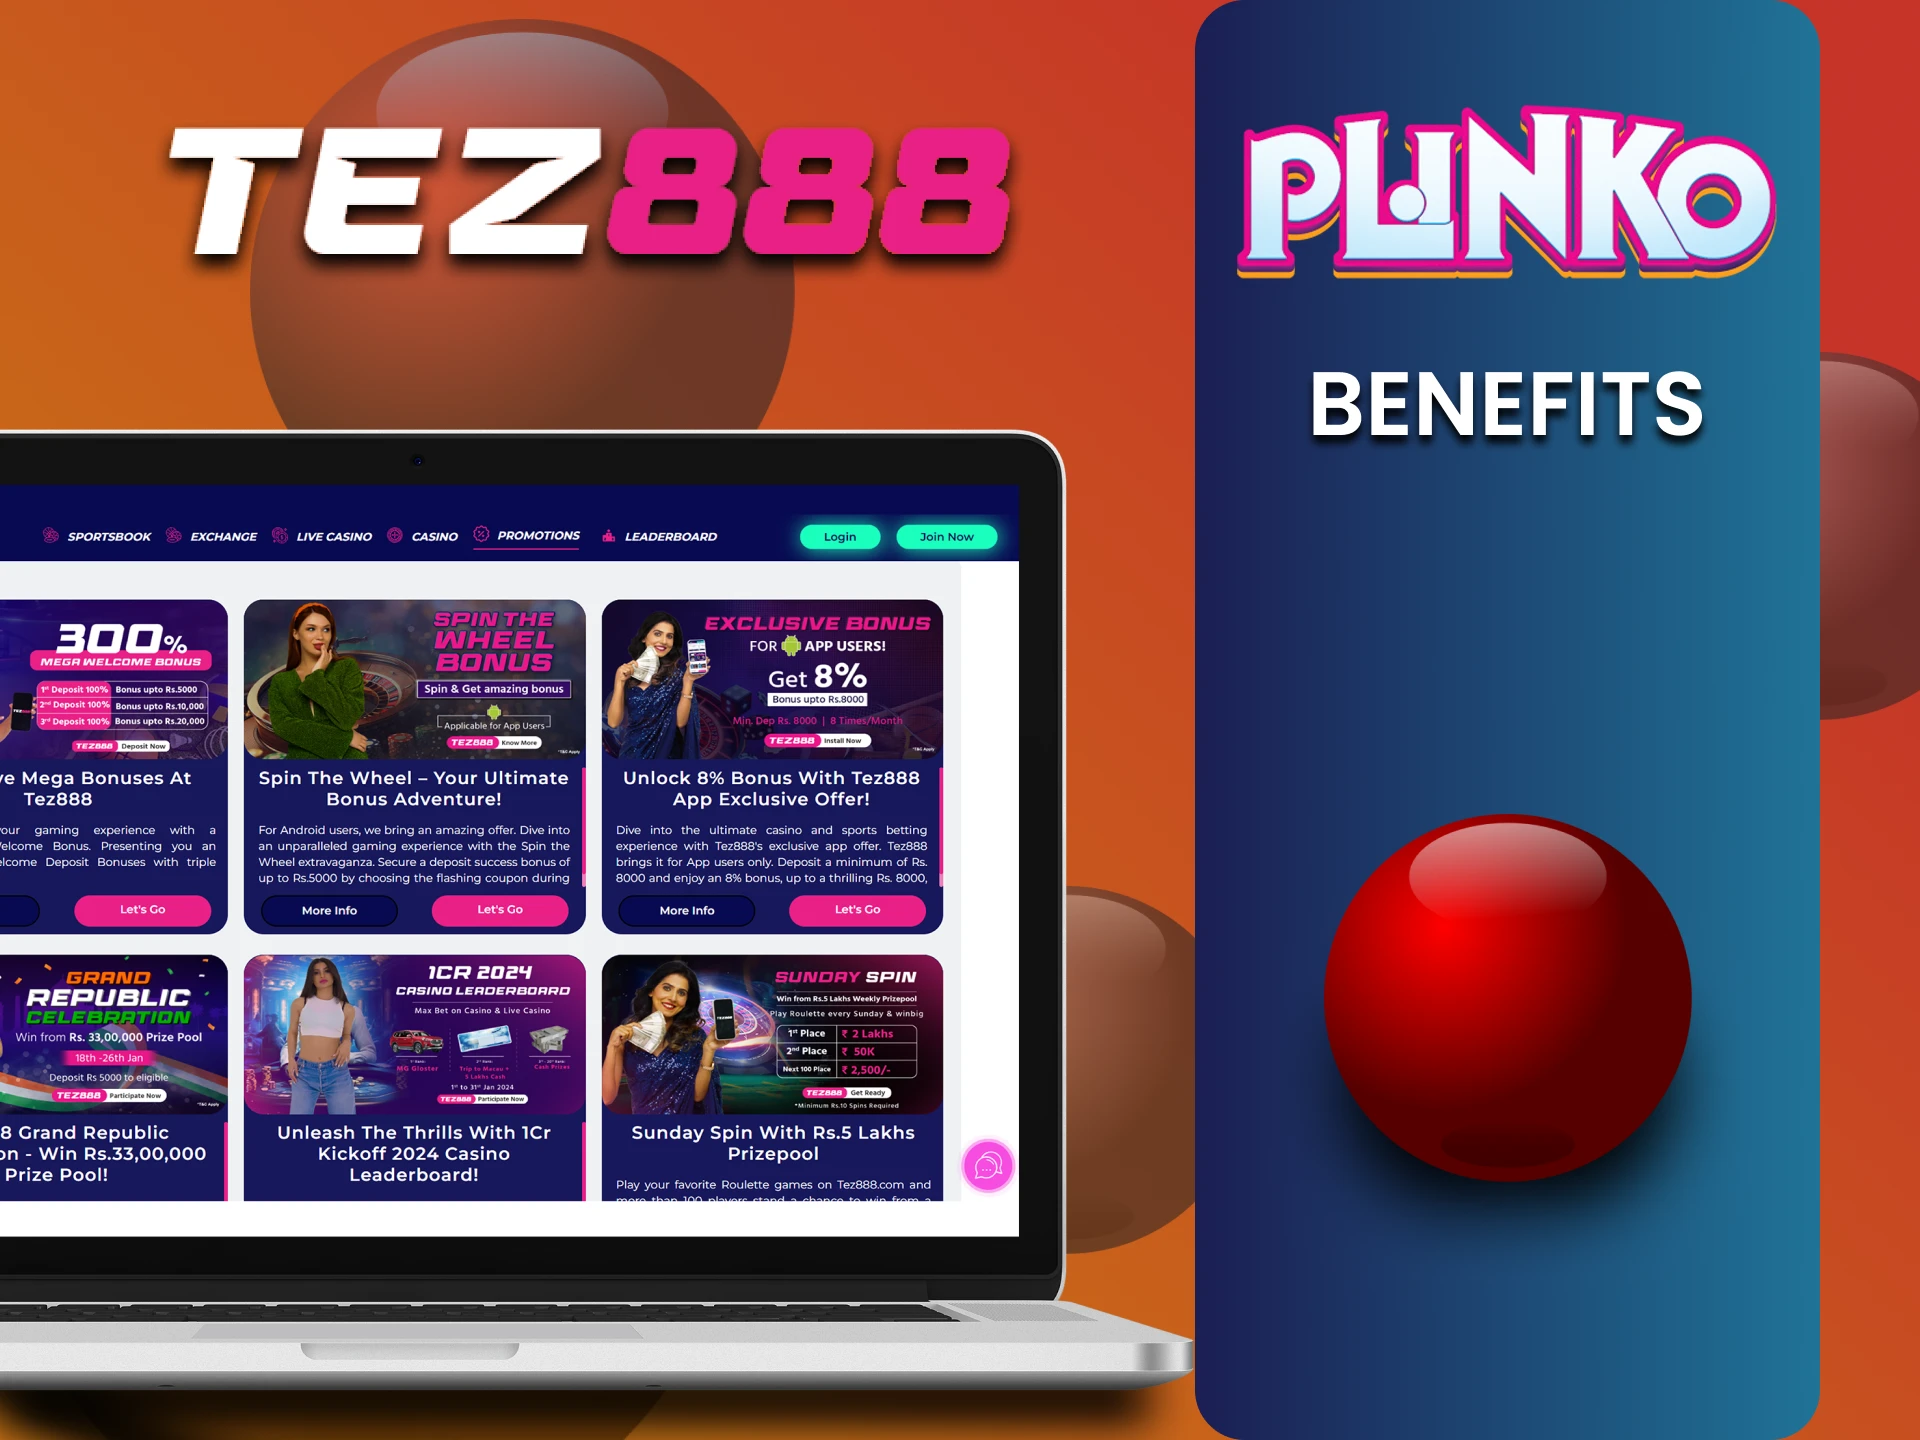 Find out about Tez888 benefits for playing Plinko.